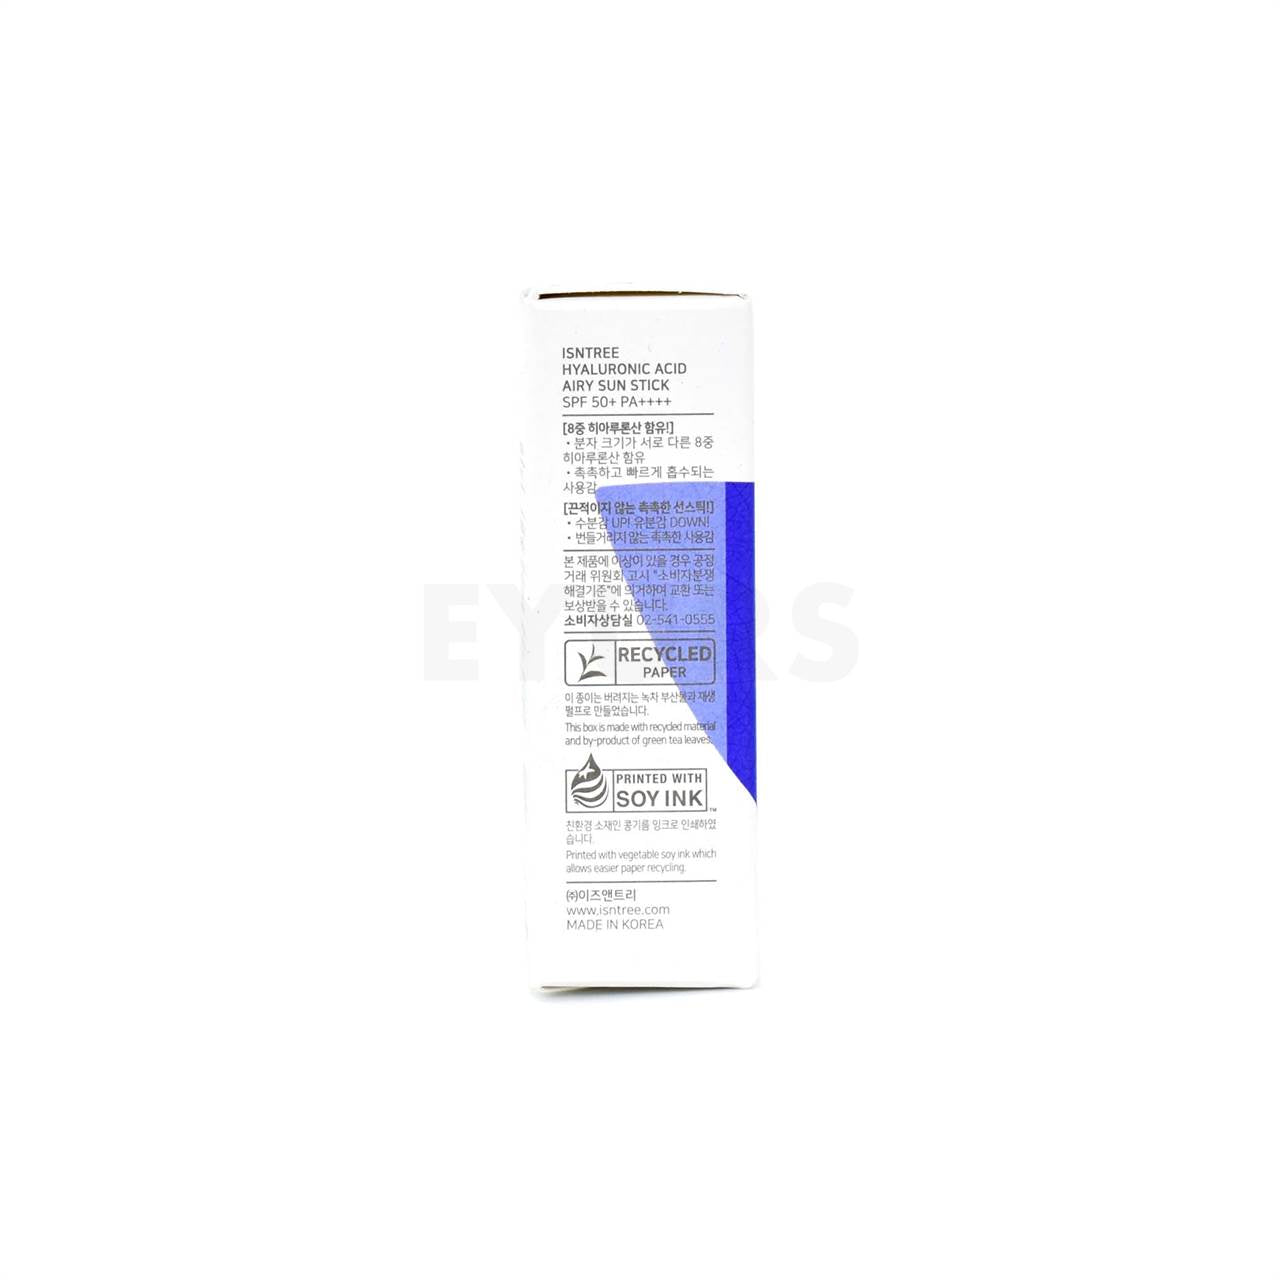 isntree hyaluronic acid airy sun stick left side packaging